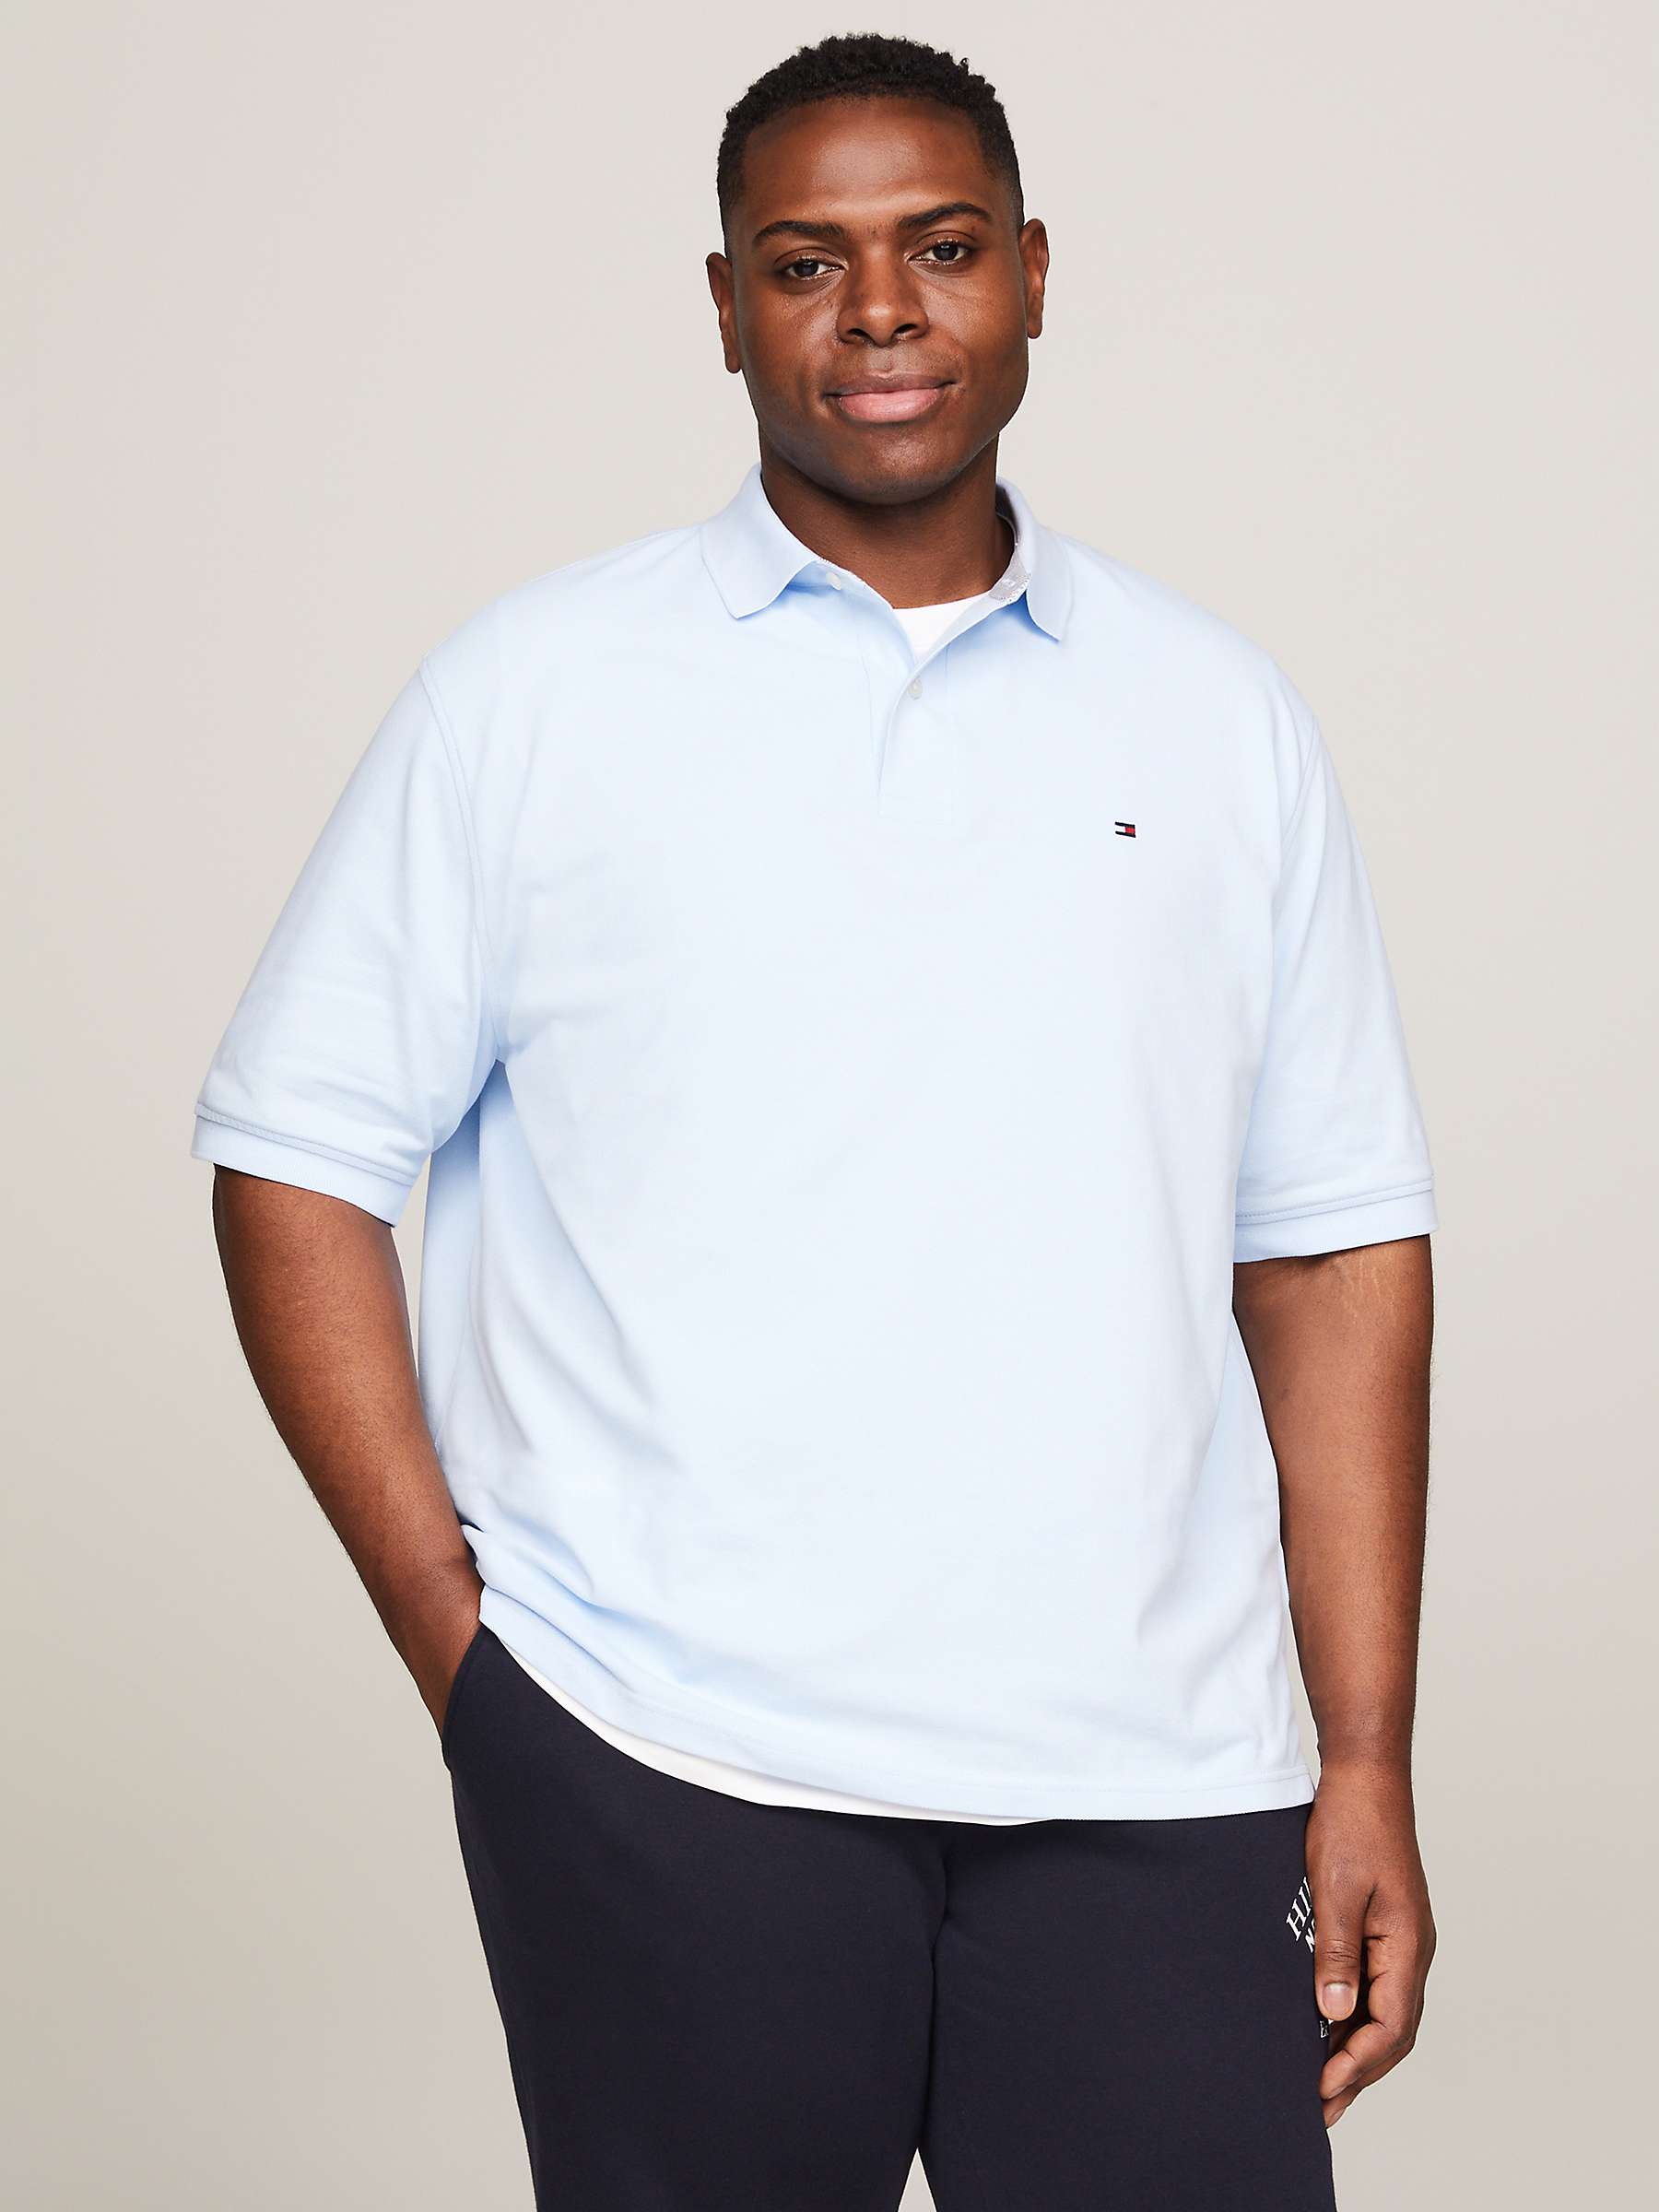 Buy Tommy Hilfiger Big & Tall 1985 Polo Shirt Online at johnlewis.com